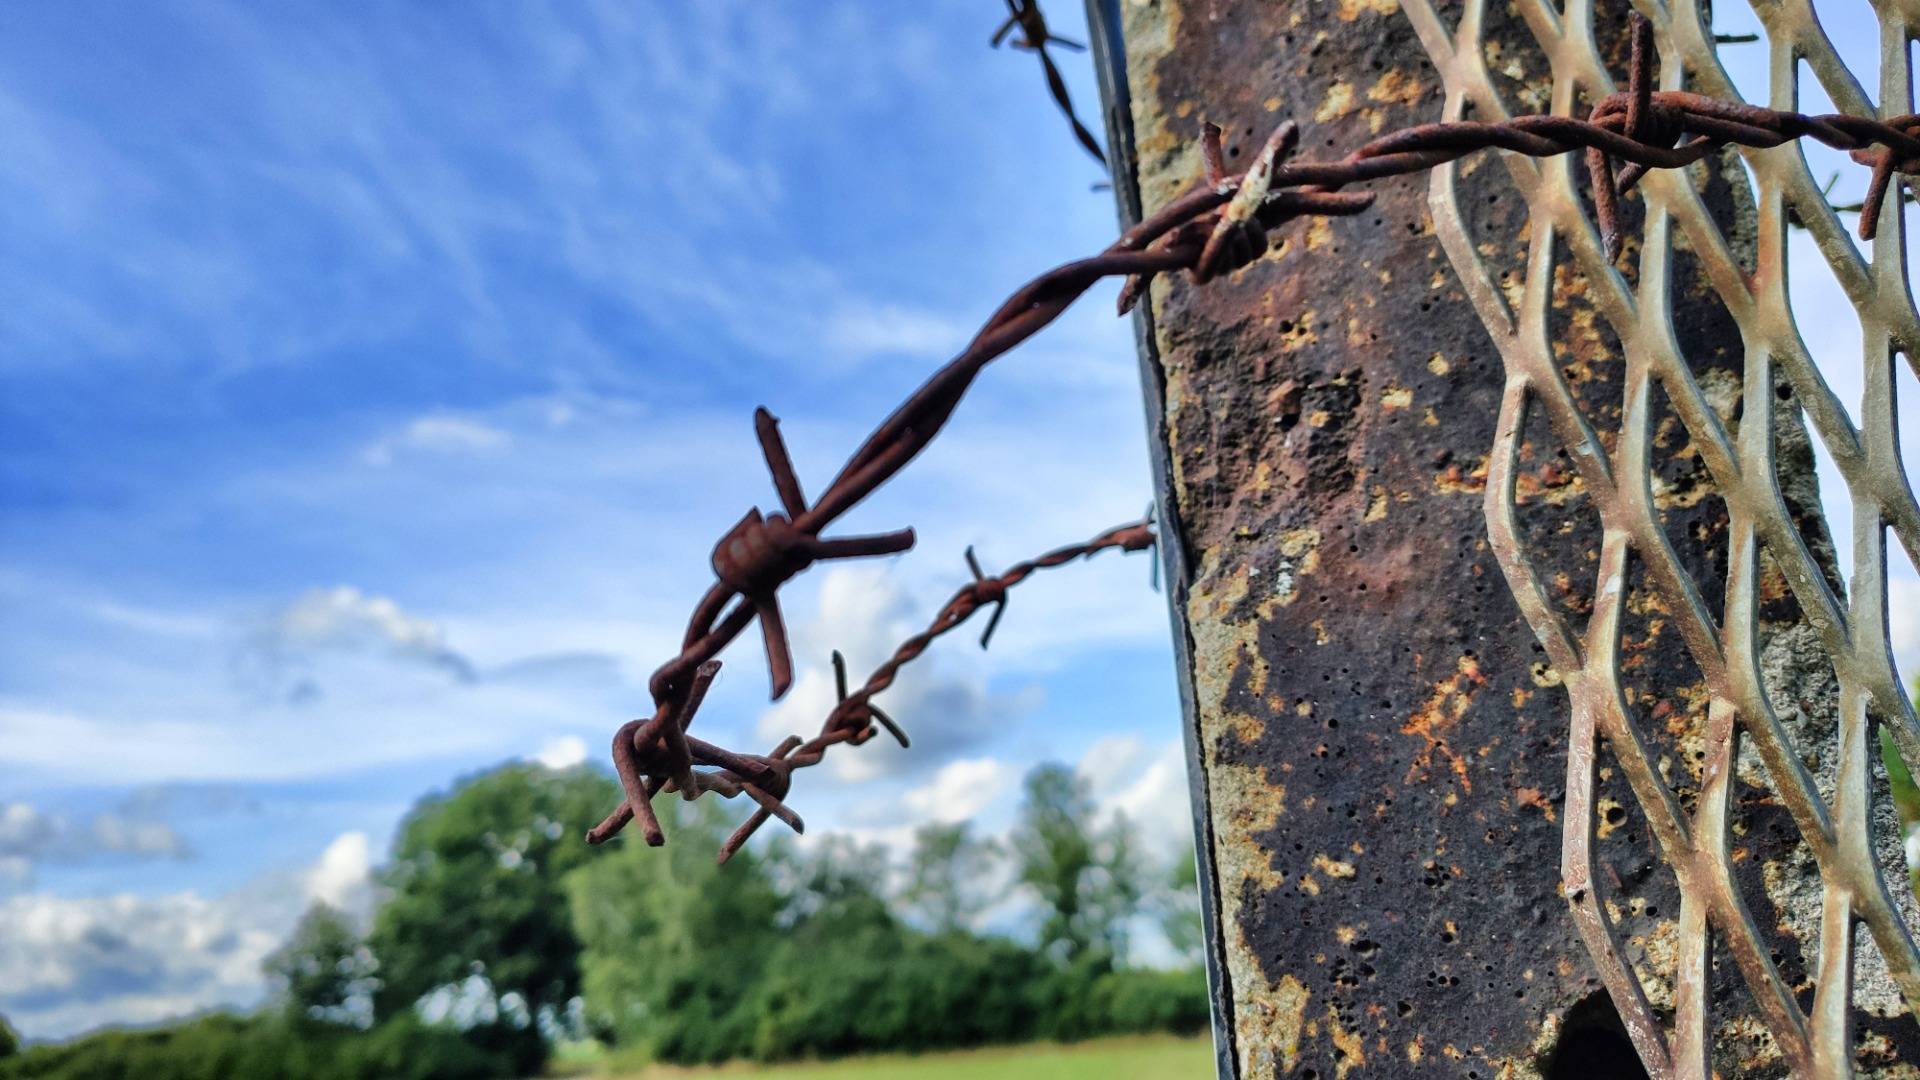 Barbed wire survided the ages.